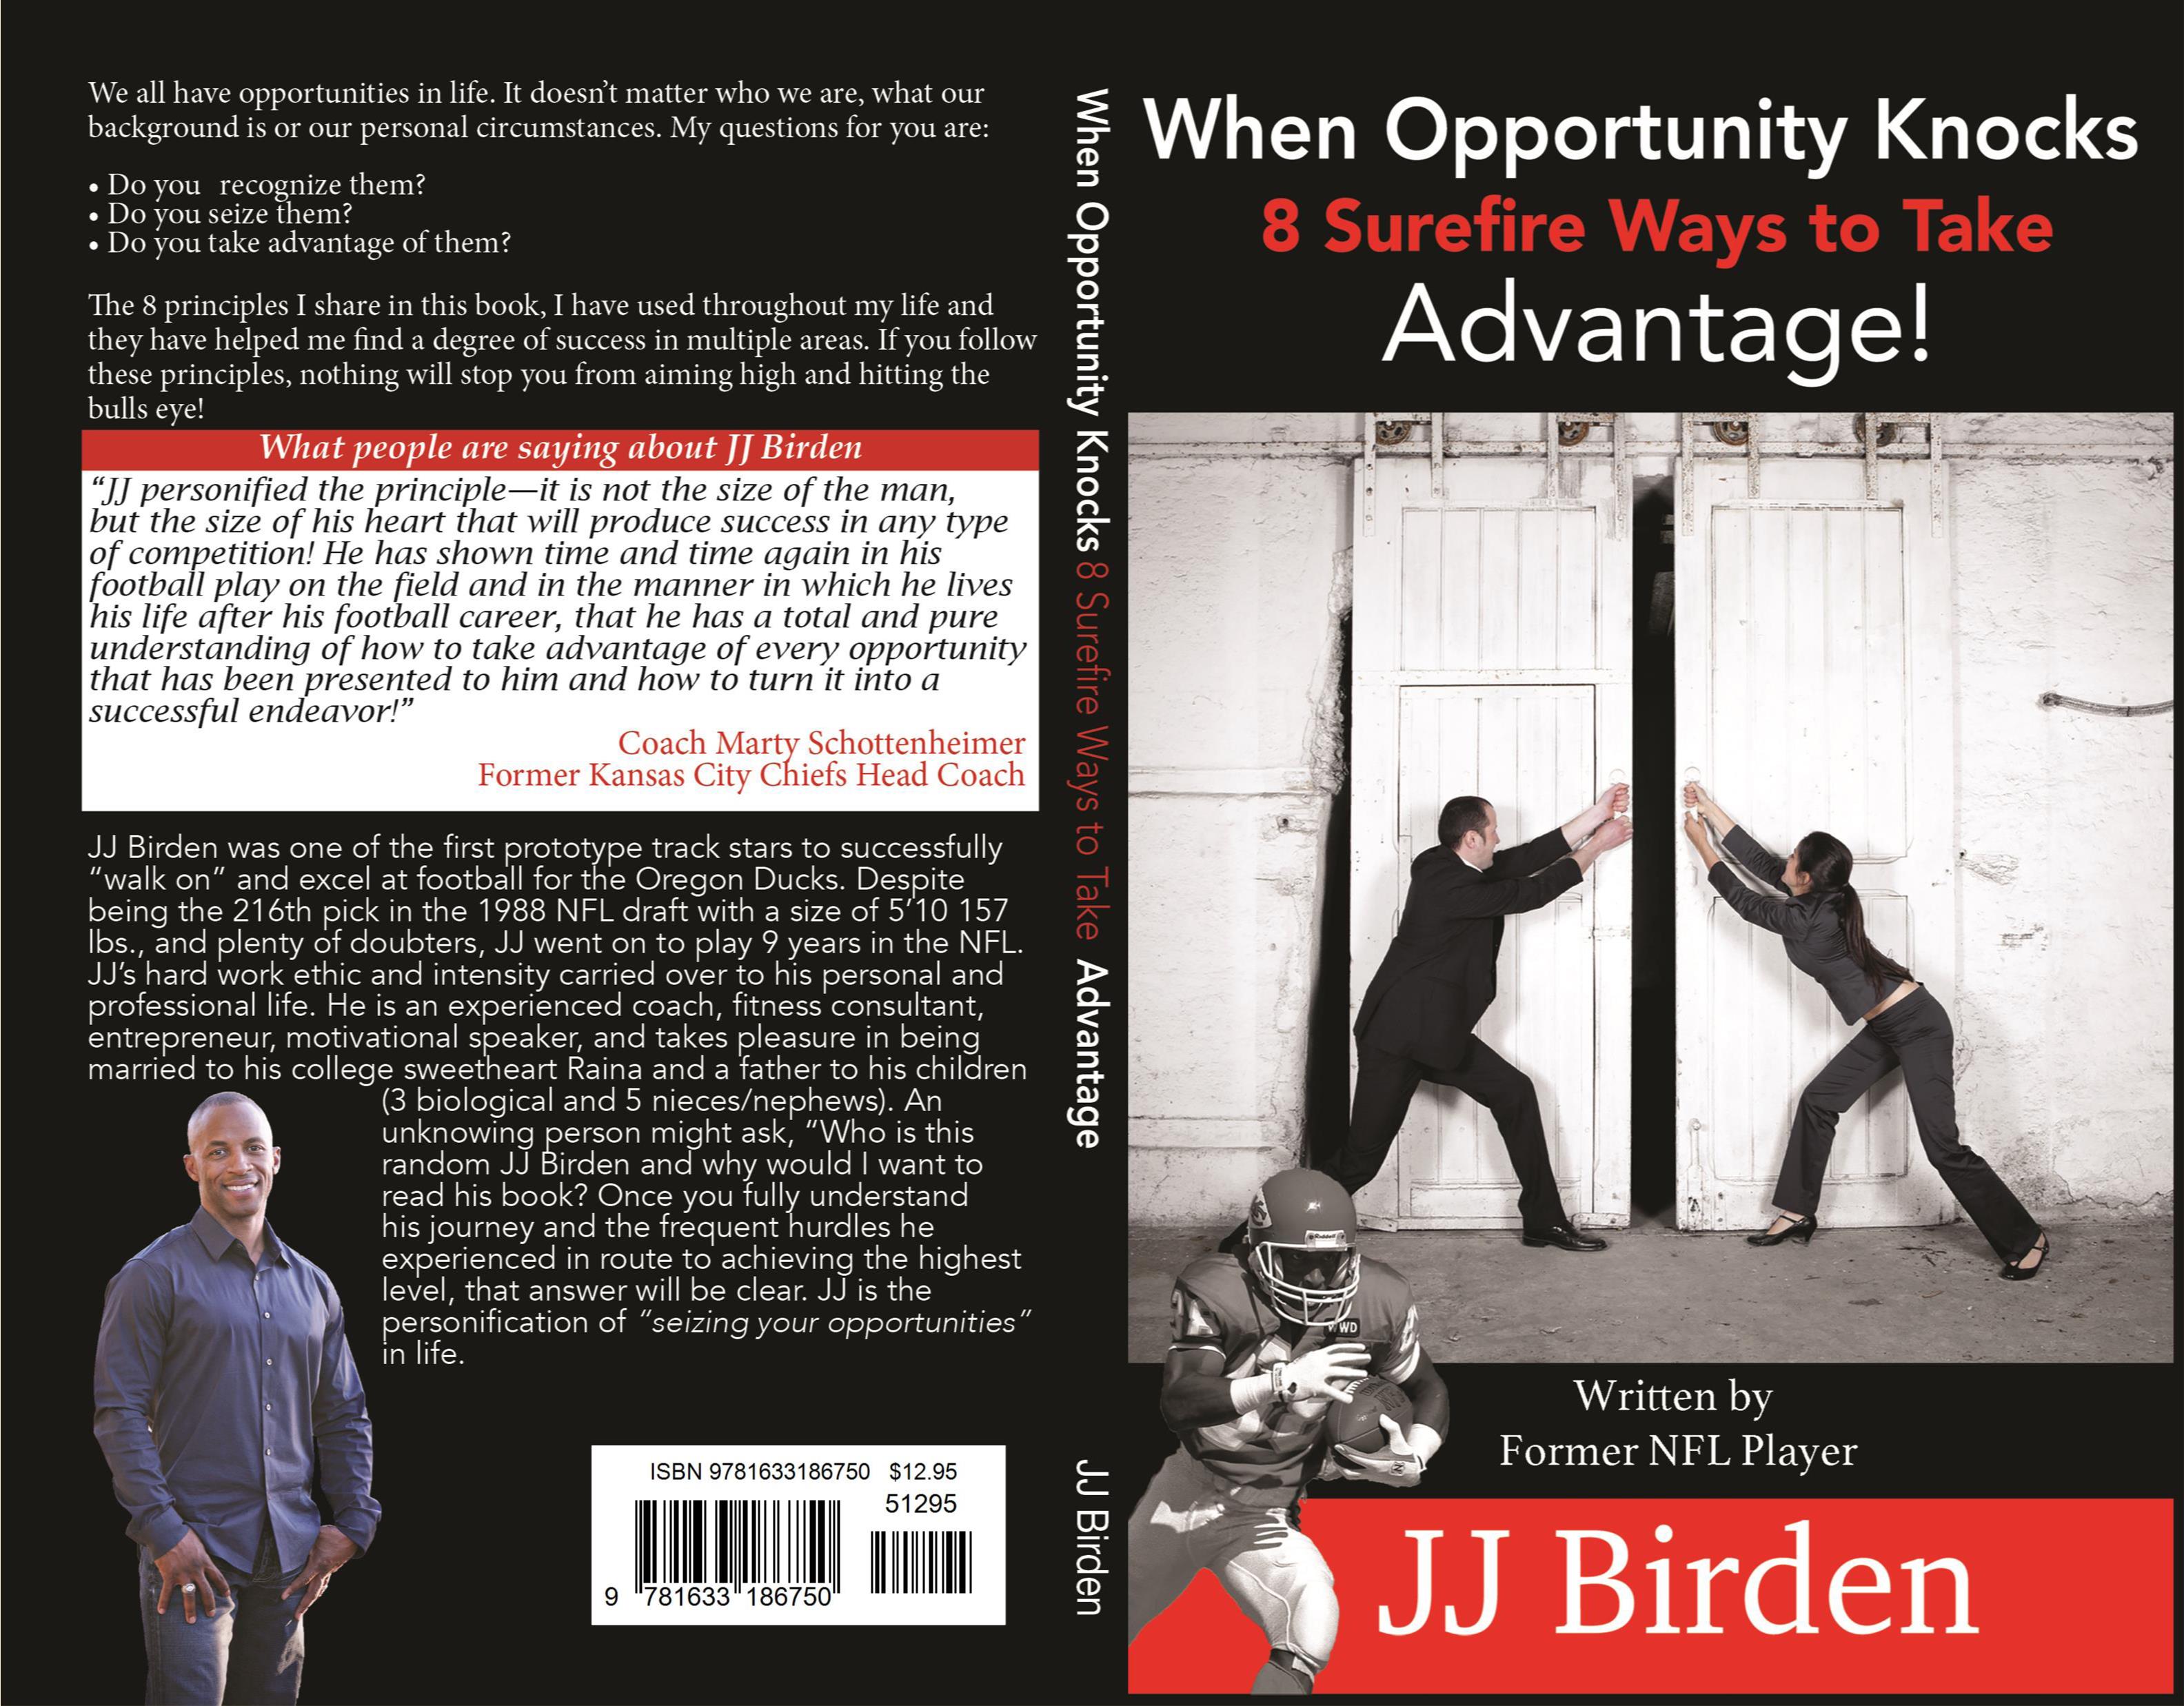 When Opportunity Knocks, 8 Surefire Ways to Take Advantage! cover image